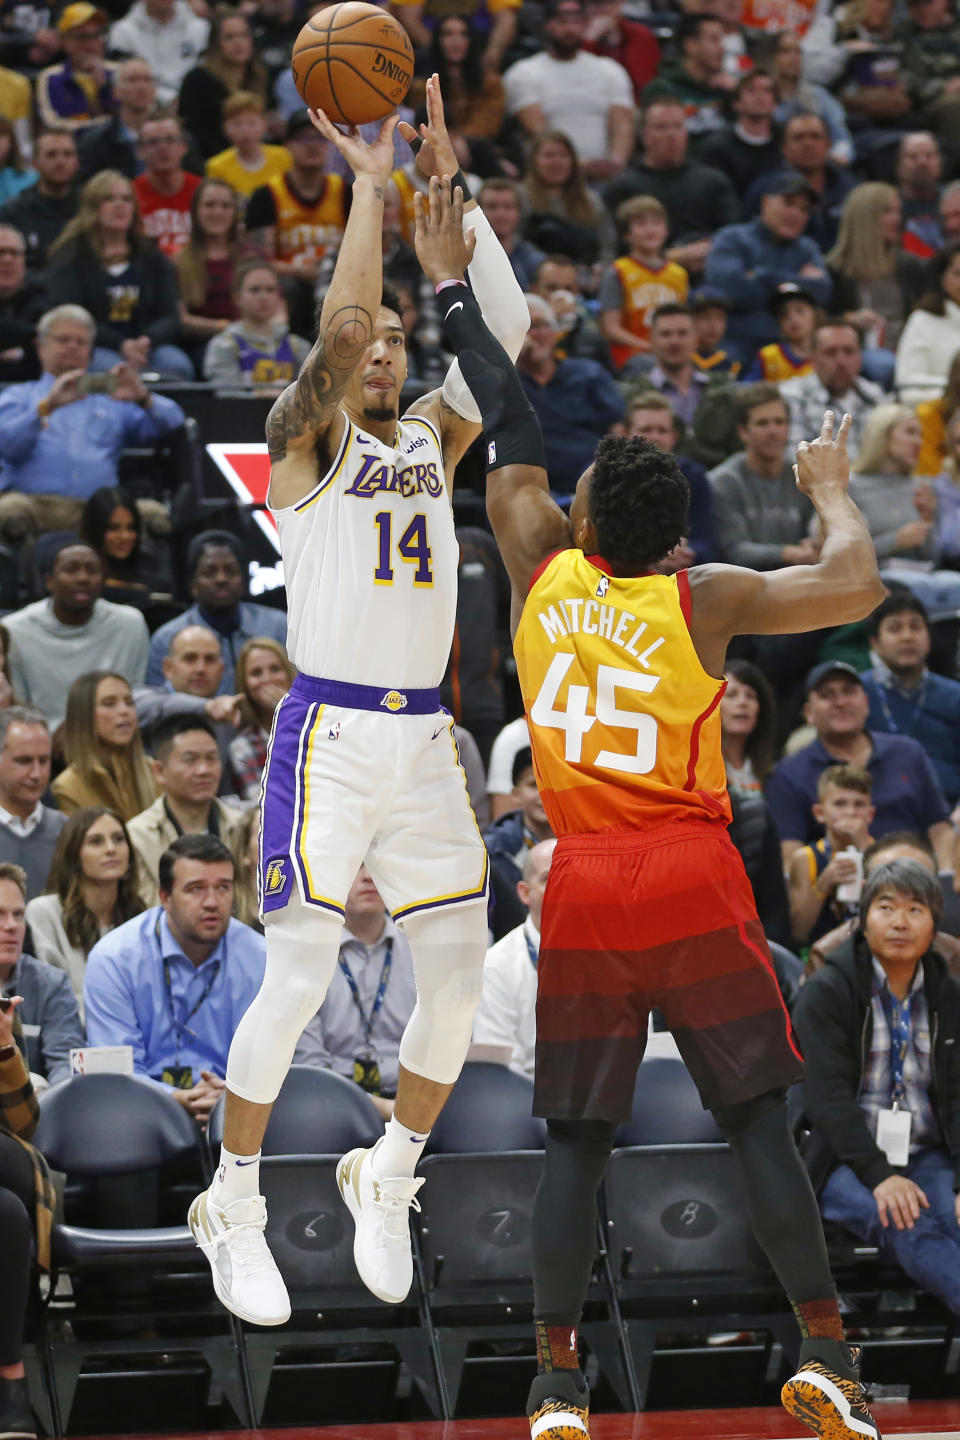 Los Angeles Lakers guard Danny Green (14) shoots as Utah Jazz guard Donovan Mitchell (45) defends in the first half during an NBA basketball game Wednesday, Dec. 4, 2019, in Salt Lake City. (AP Photo/Rick Bowmer)